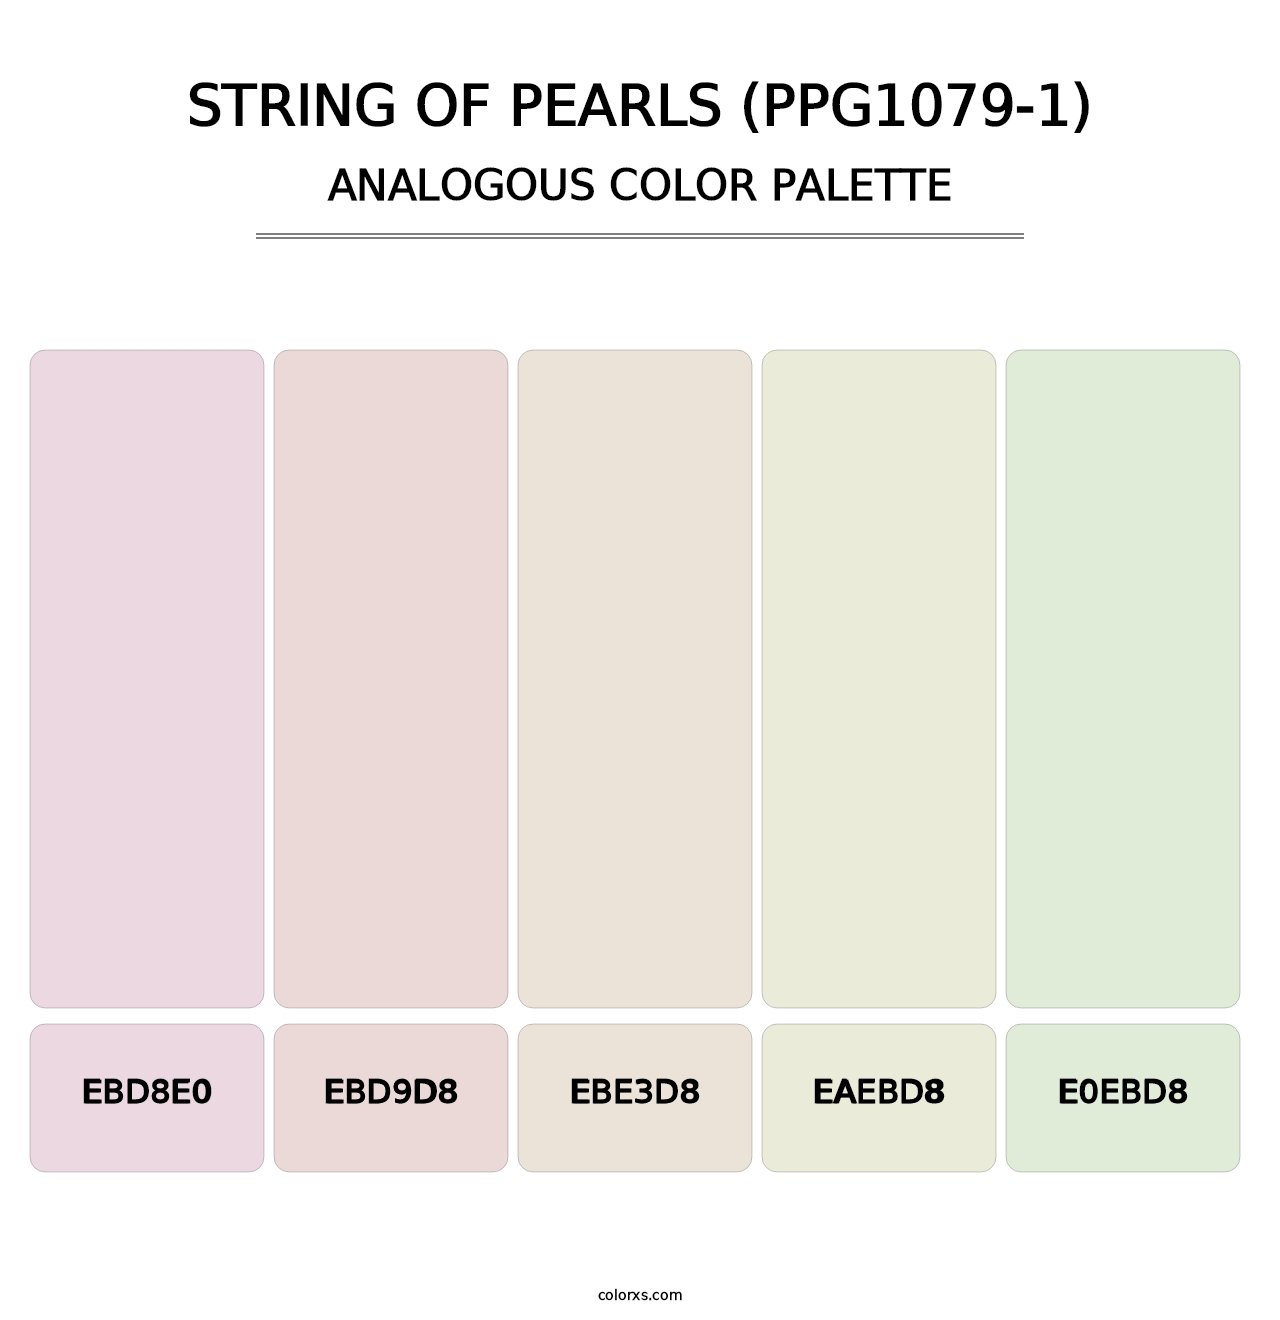 String Of Pearls (PPG1079-1) - Analogous Color Palette